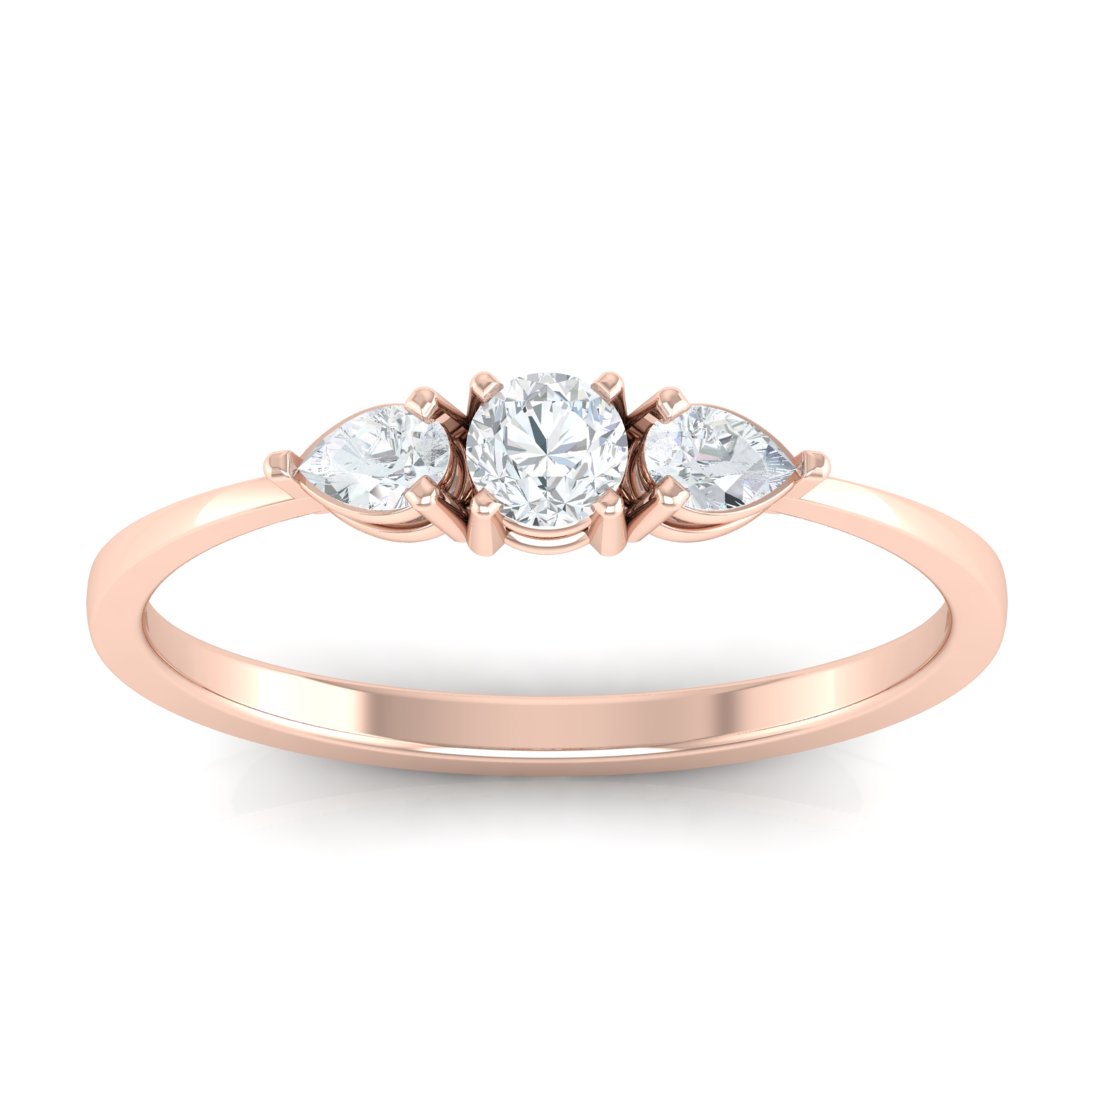 Engagement ring guide | Side stone ring 